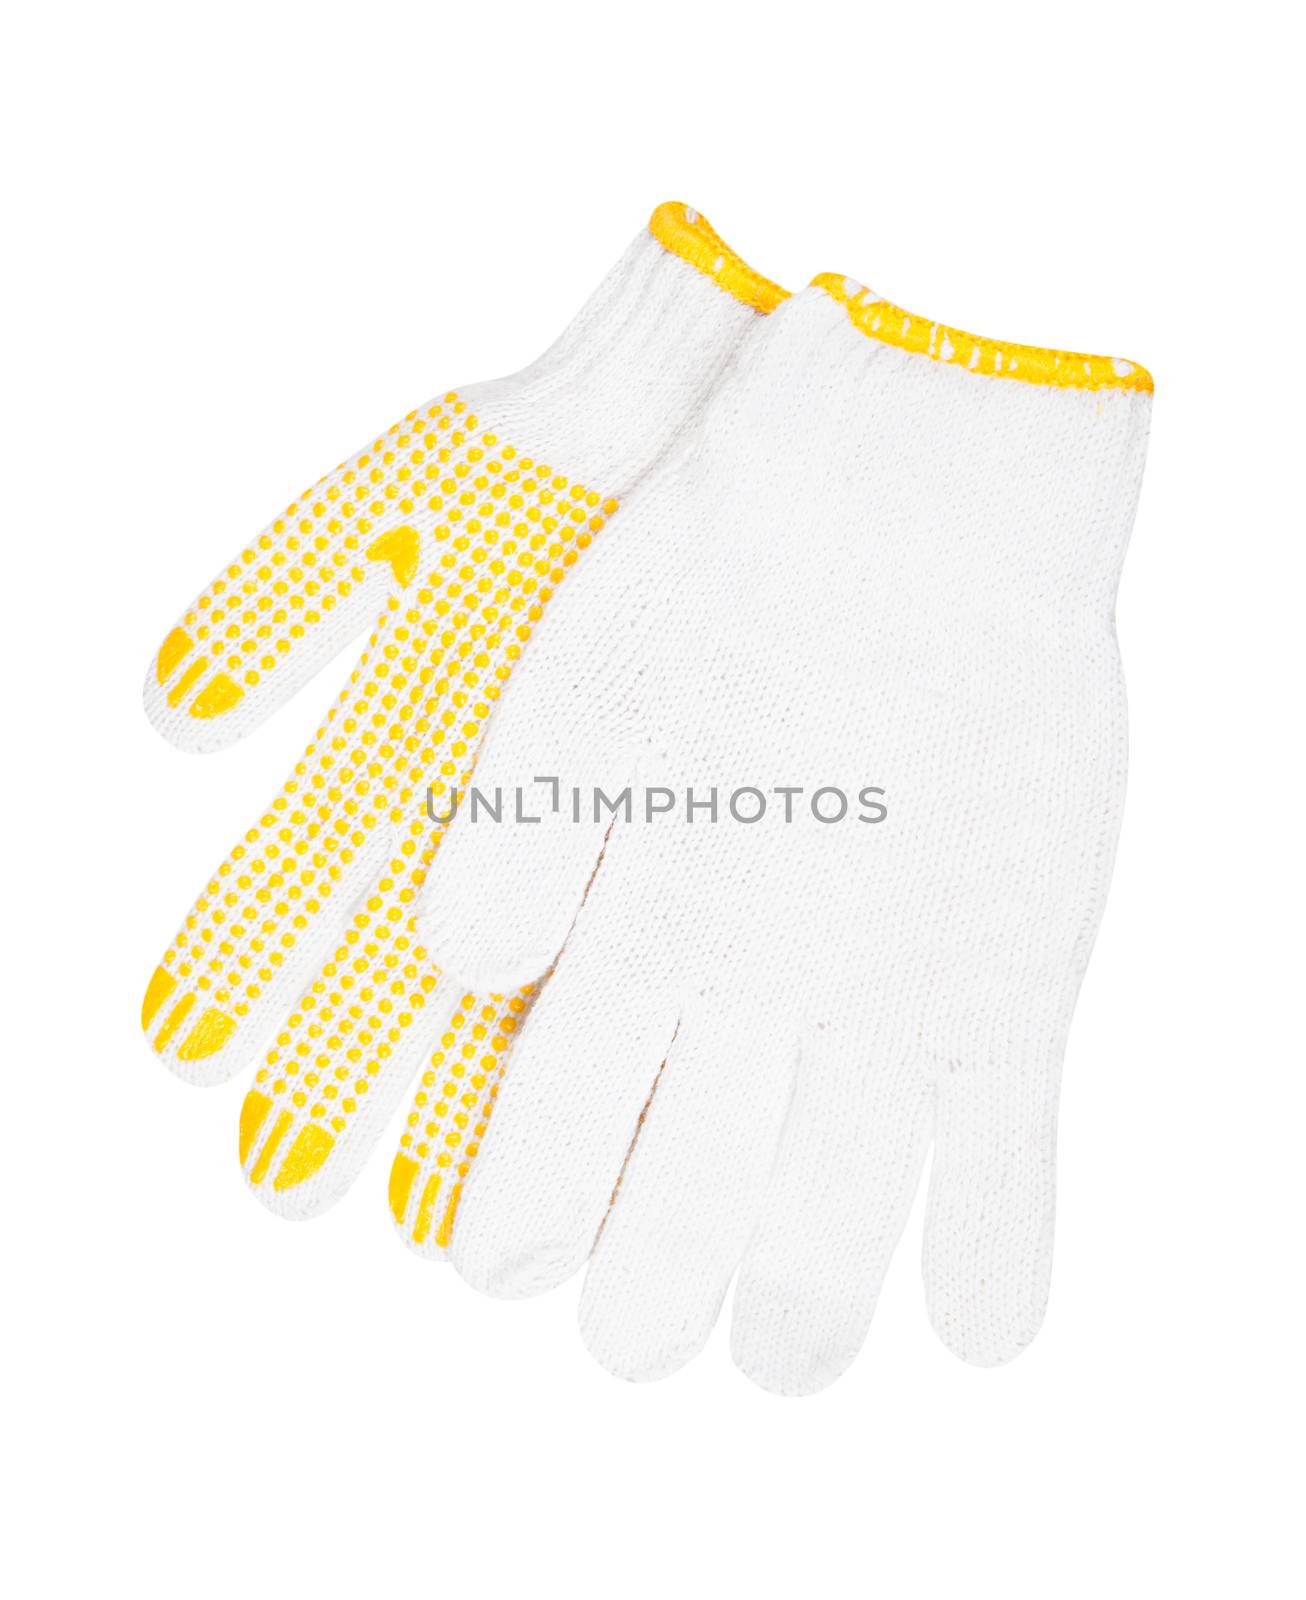 Work gloves made of cotton fabric with rubber coating isolated on white background. 